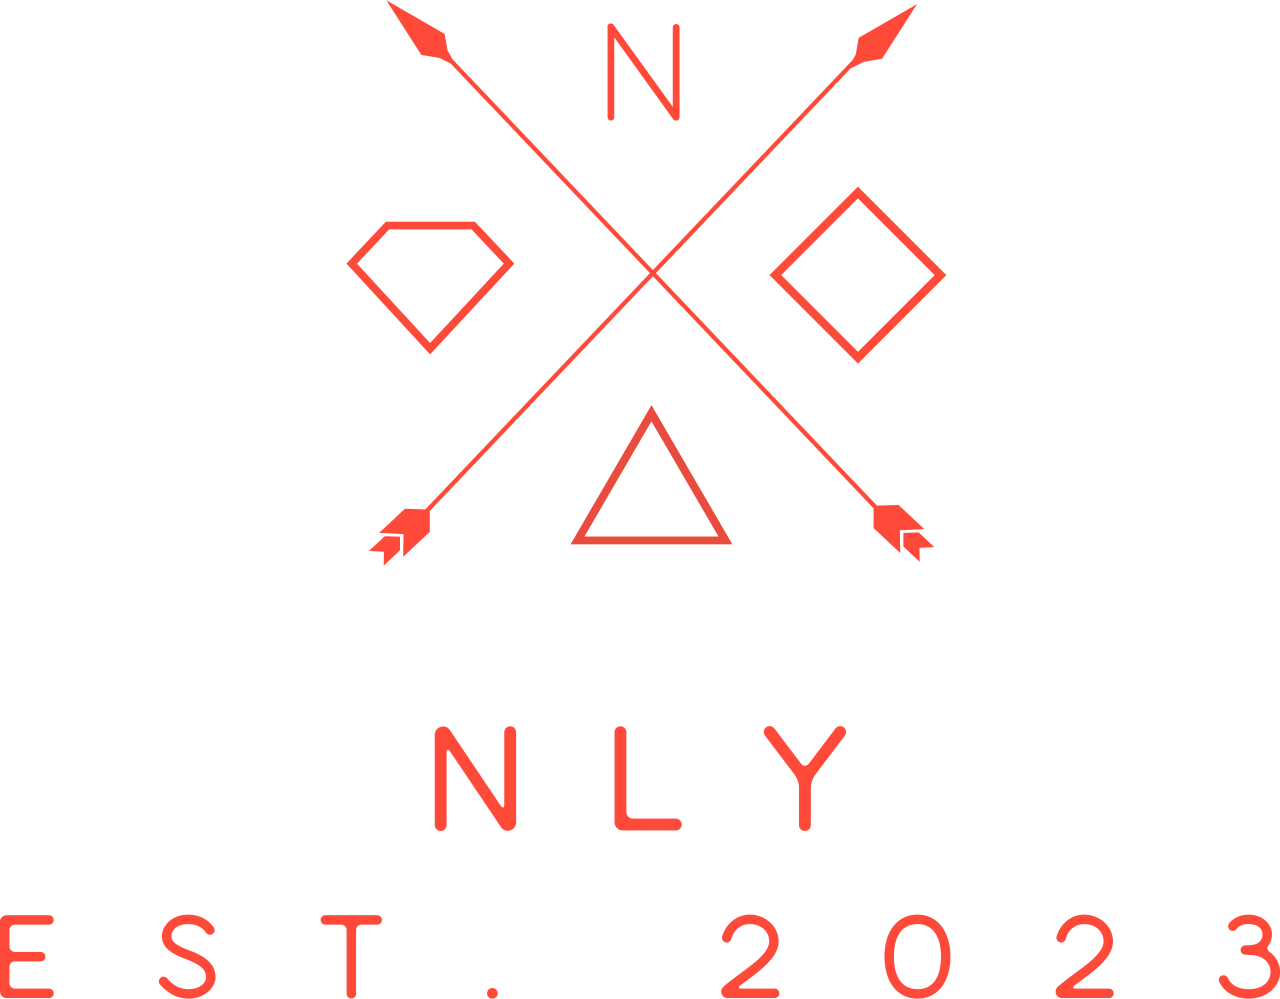 NLY's logo